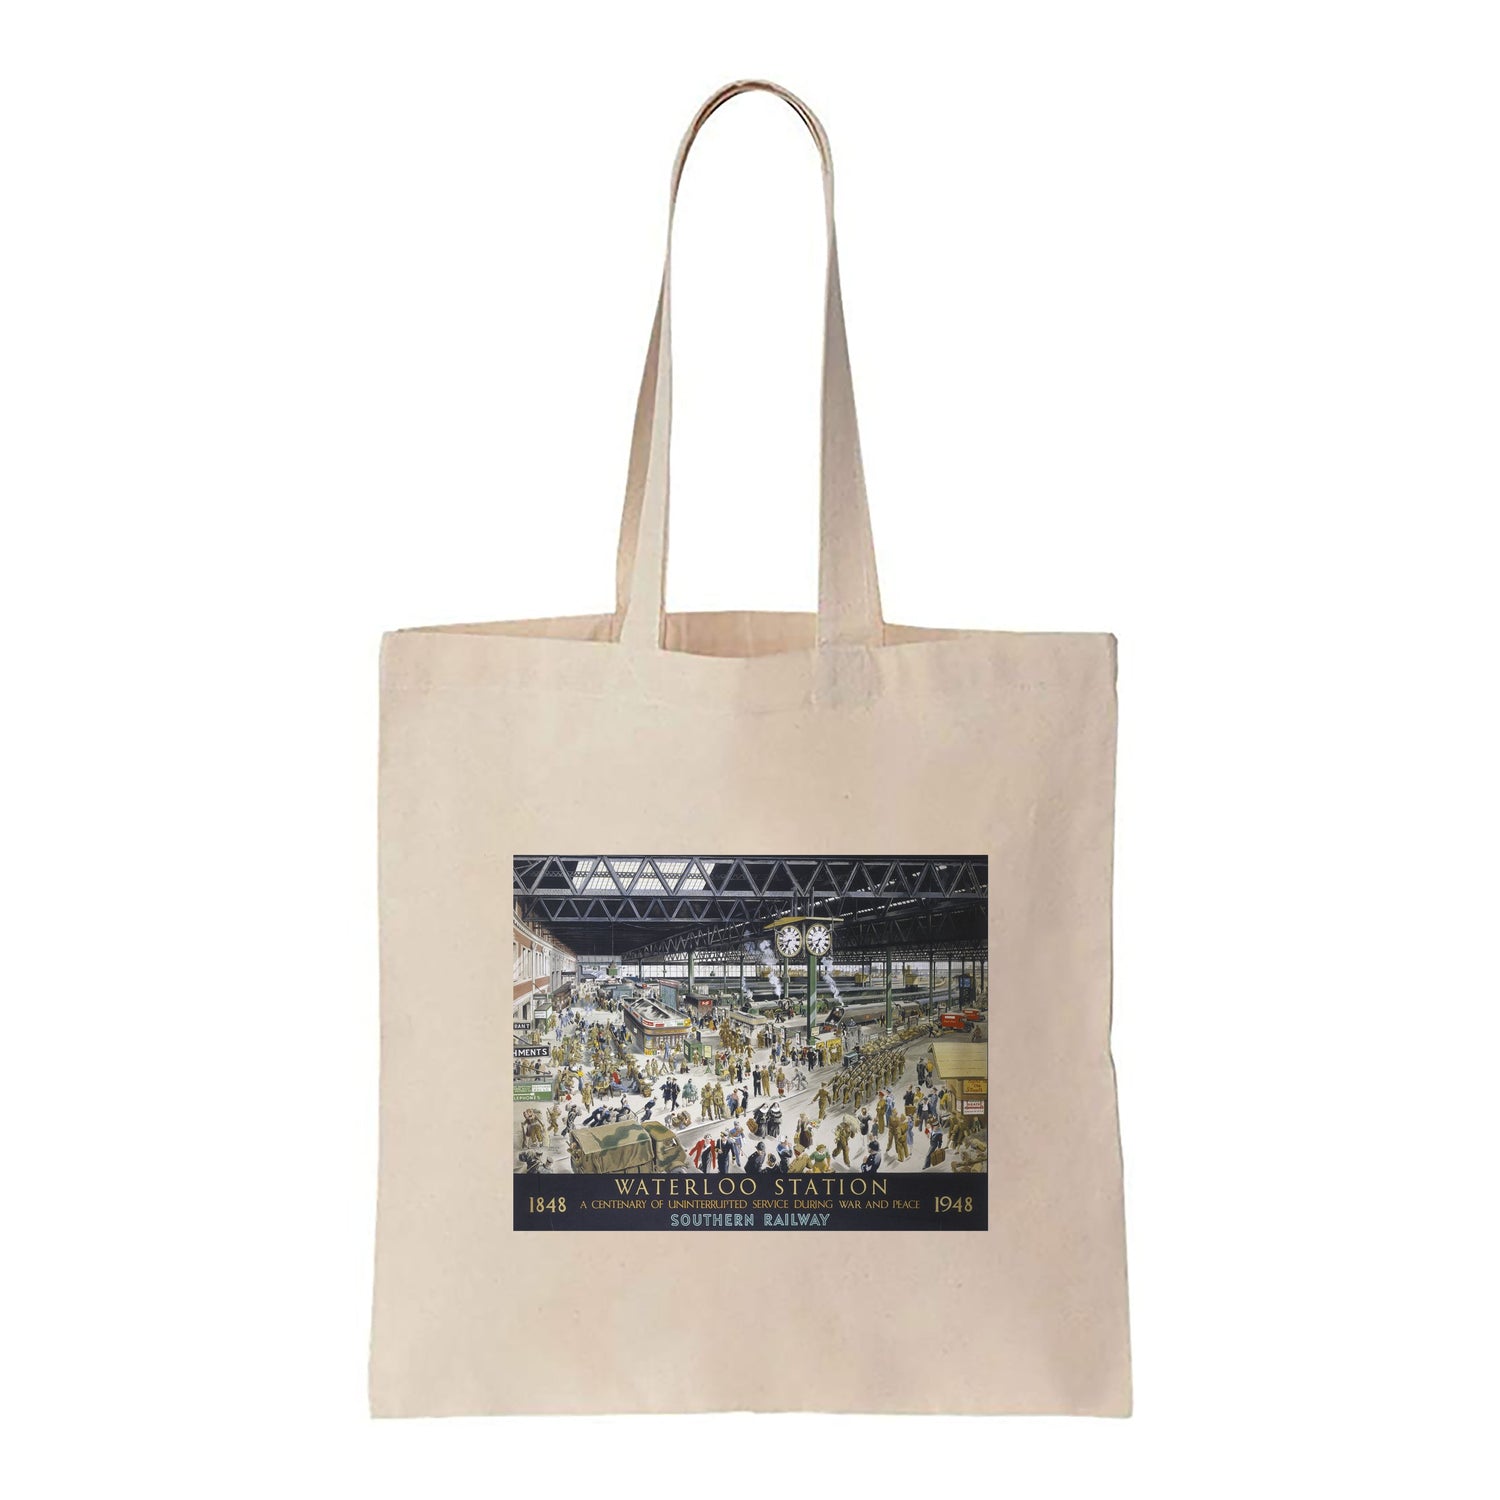 Waterloo Station - Southern Railway - Canvas Tote Bag